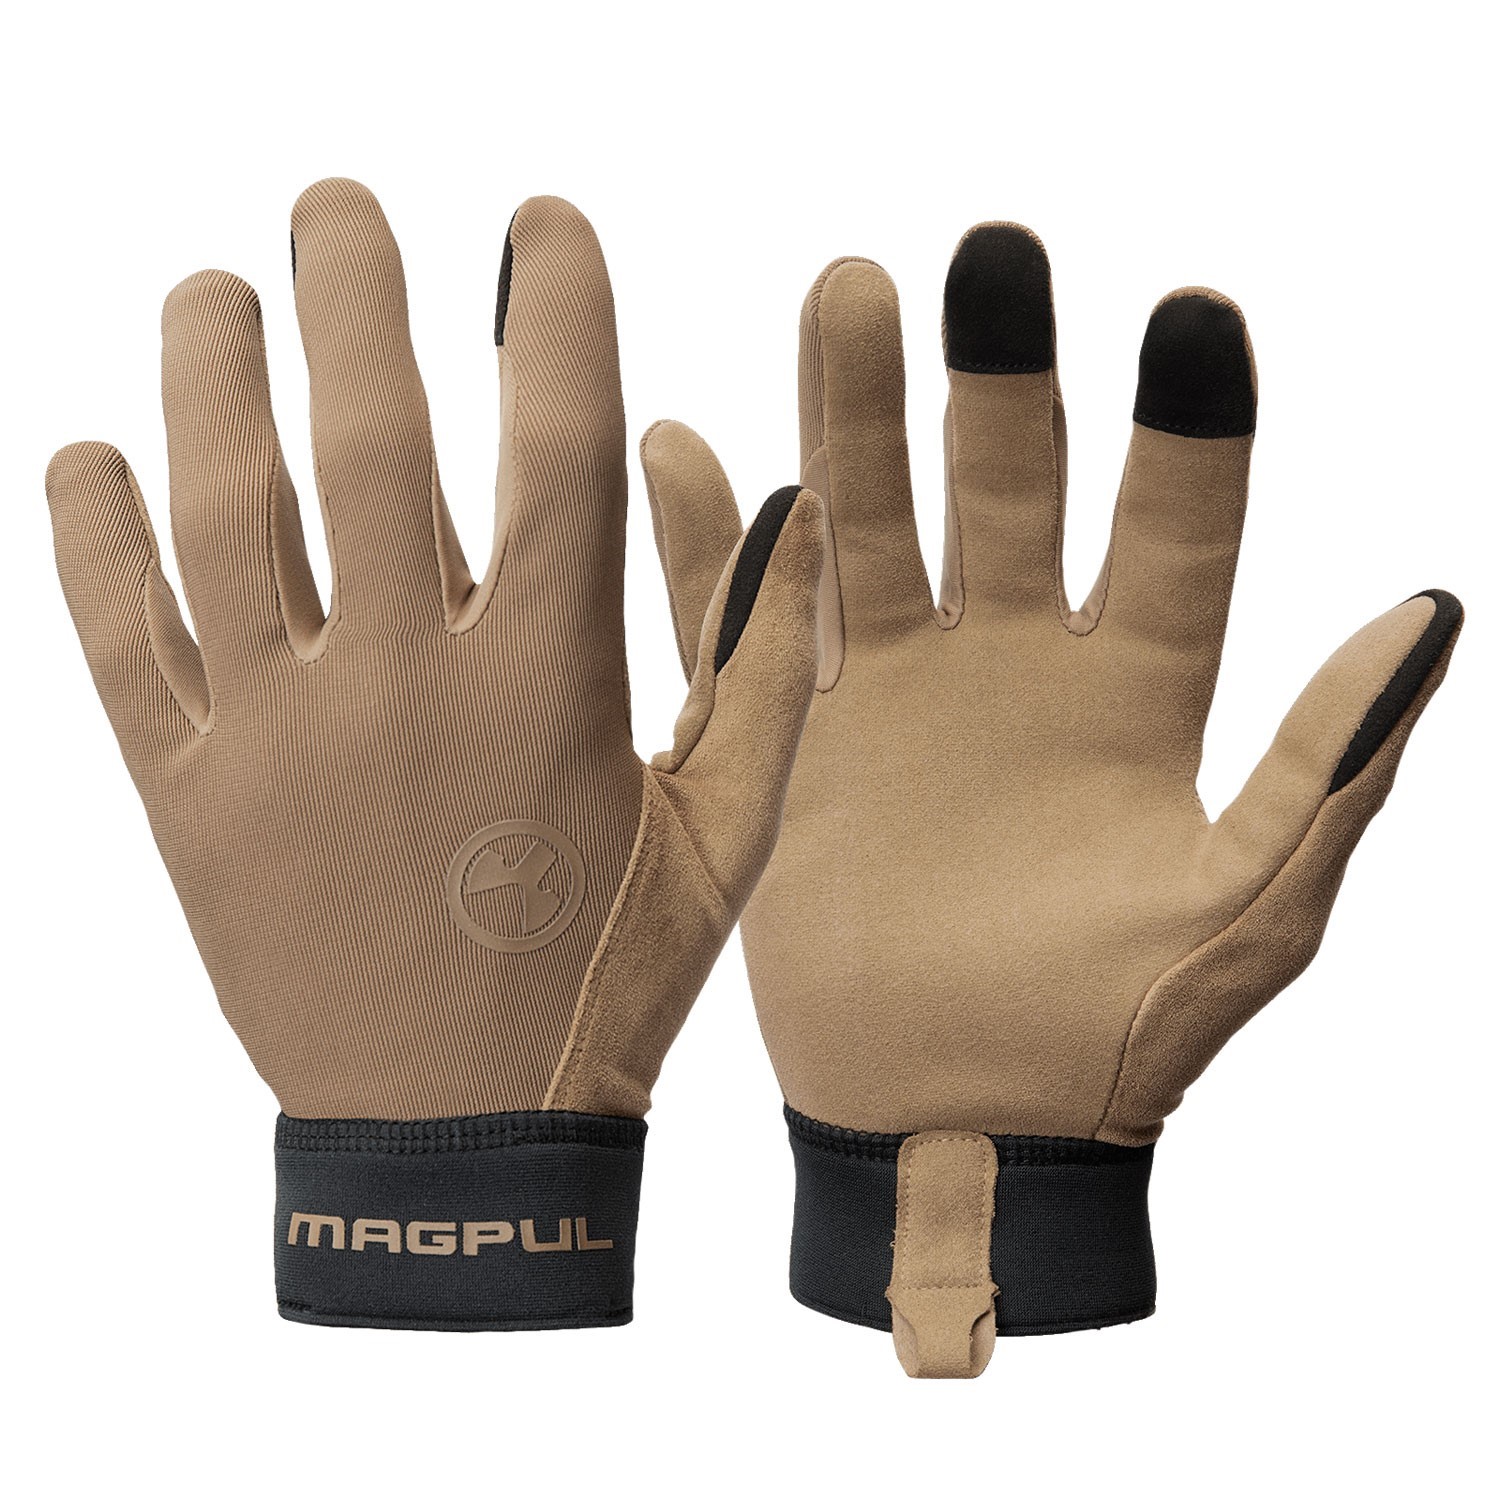 MAGPUL TECHNICAL GLOVES, XL, COYOTE, HAS TOUCHSCREEN CAPABLE FINGER TIPS.